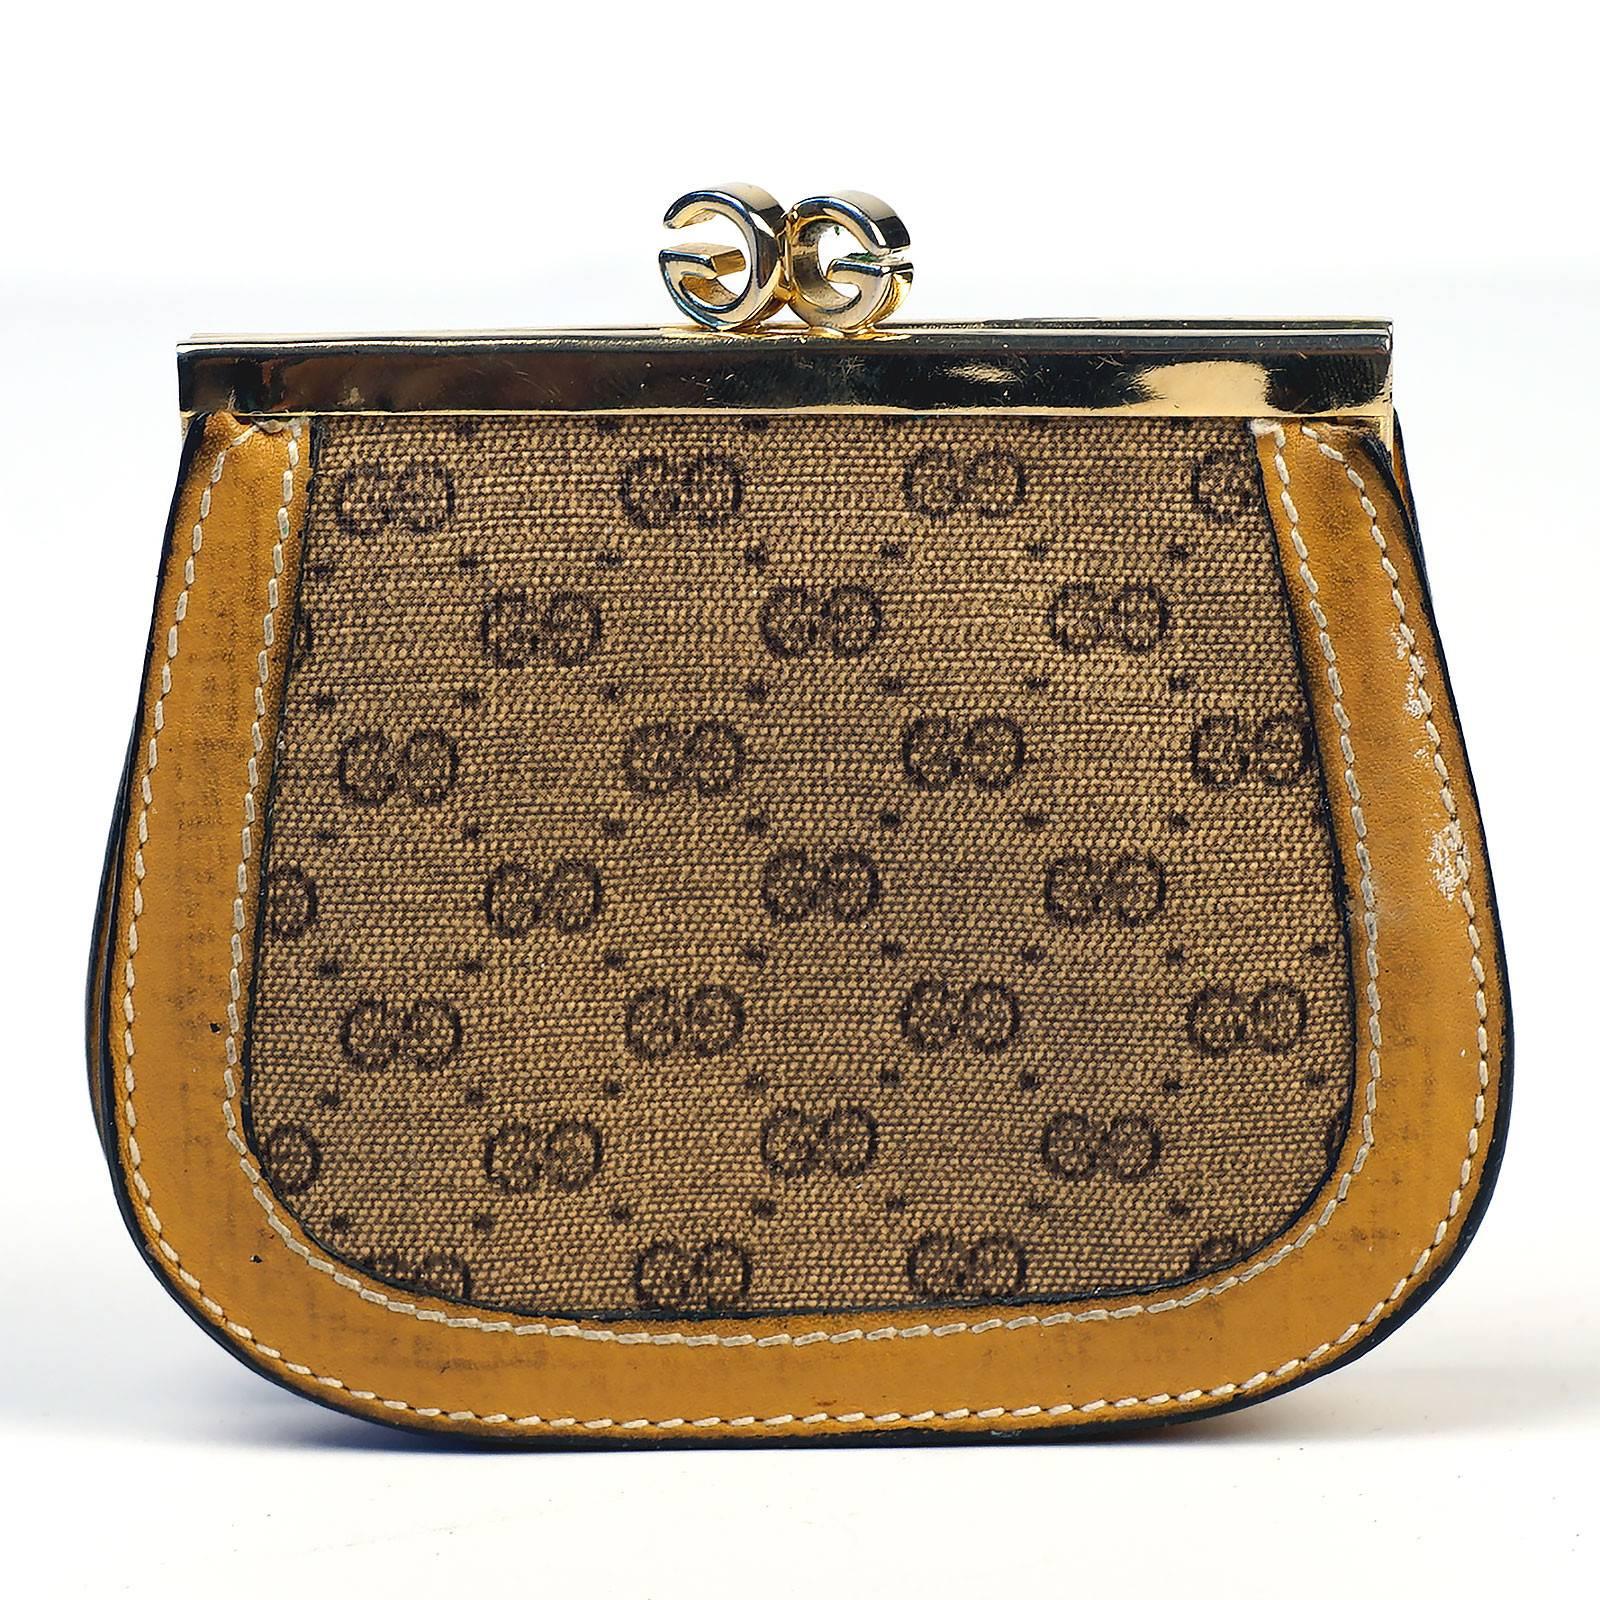 Gucci double G pattern change purse with two inside pockets and a double G snap closure. 

-Measurements-
length: 3.25"
height: 2.5"

Good Vintage Condition:Please remember all clothes are previously owned and gently worn unless otherwise